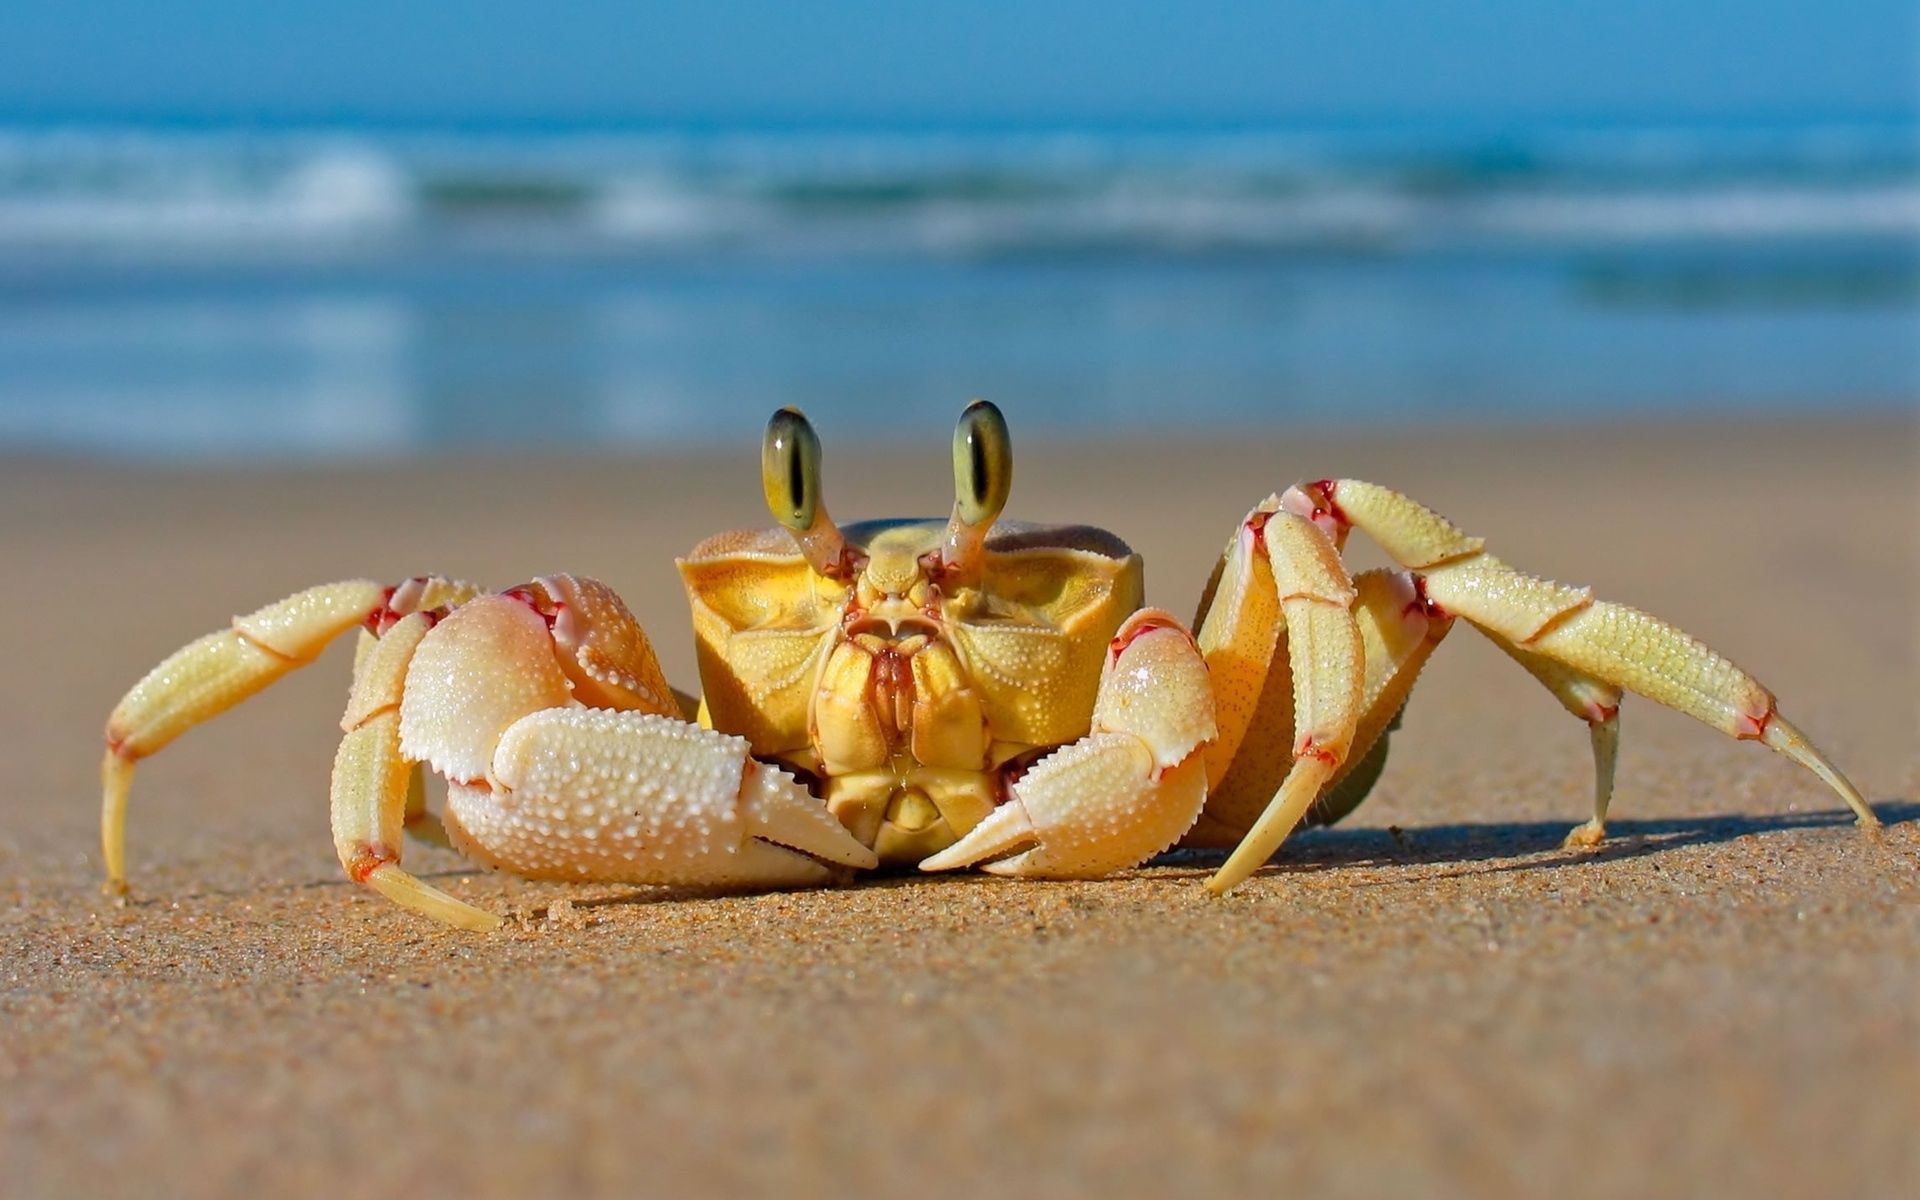 Best Crab wallpapers for phone screen